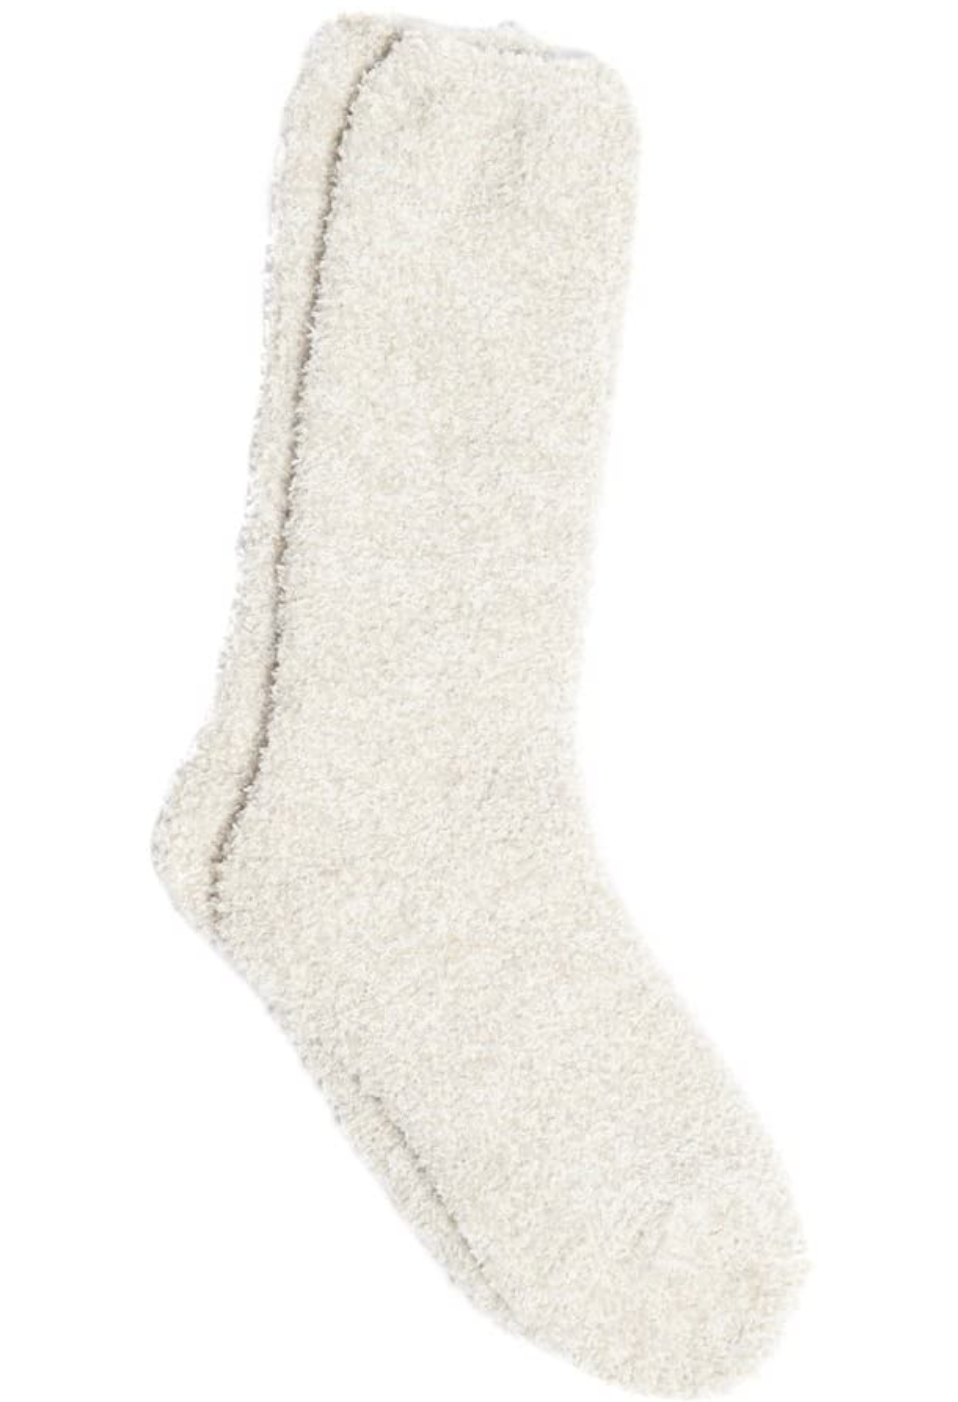 Barefoot Dreams Soft Slipper Socks Are the Ultimate Cozy Gift